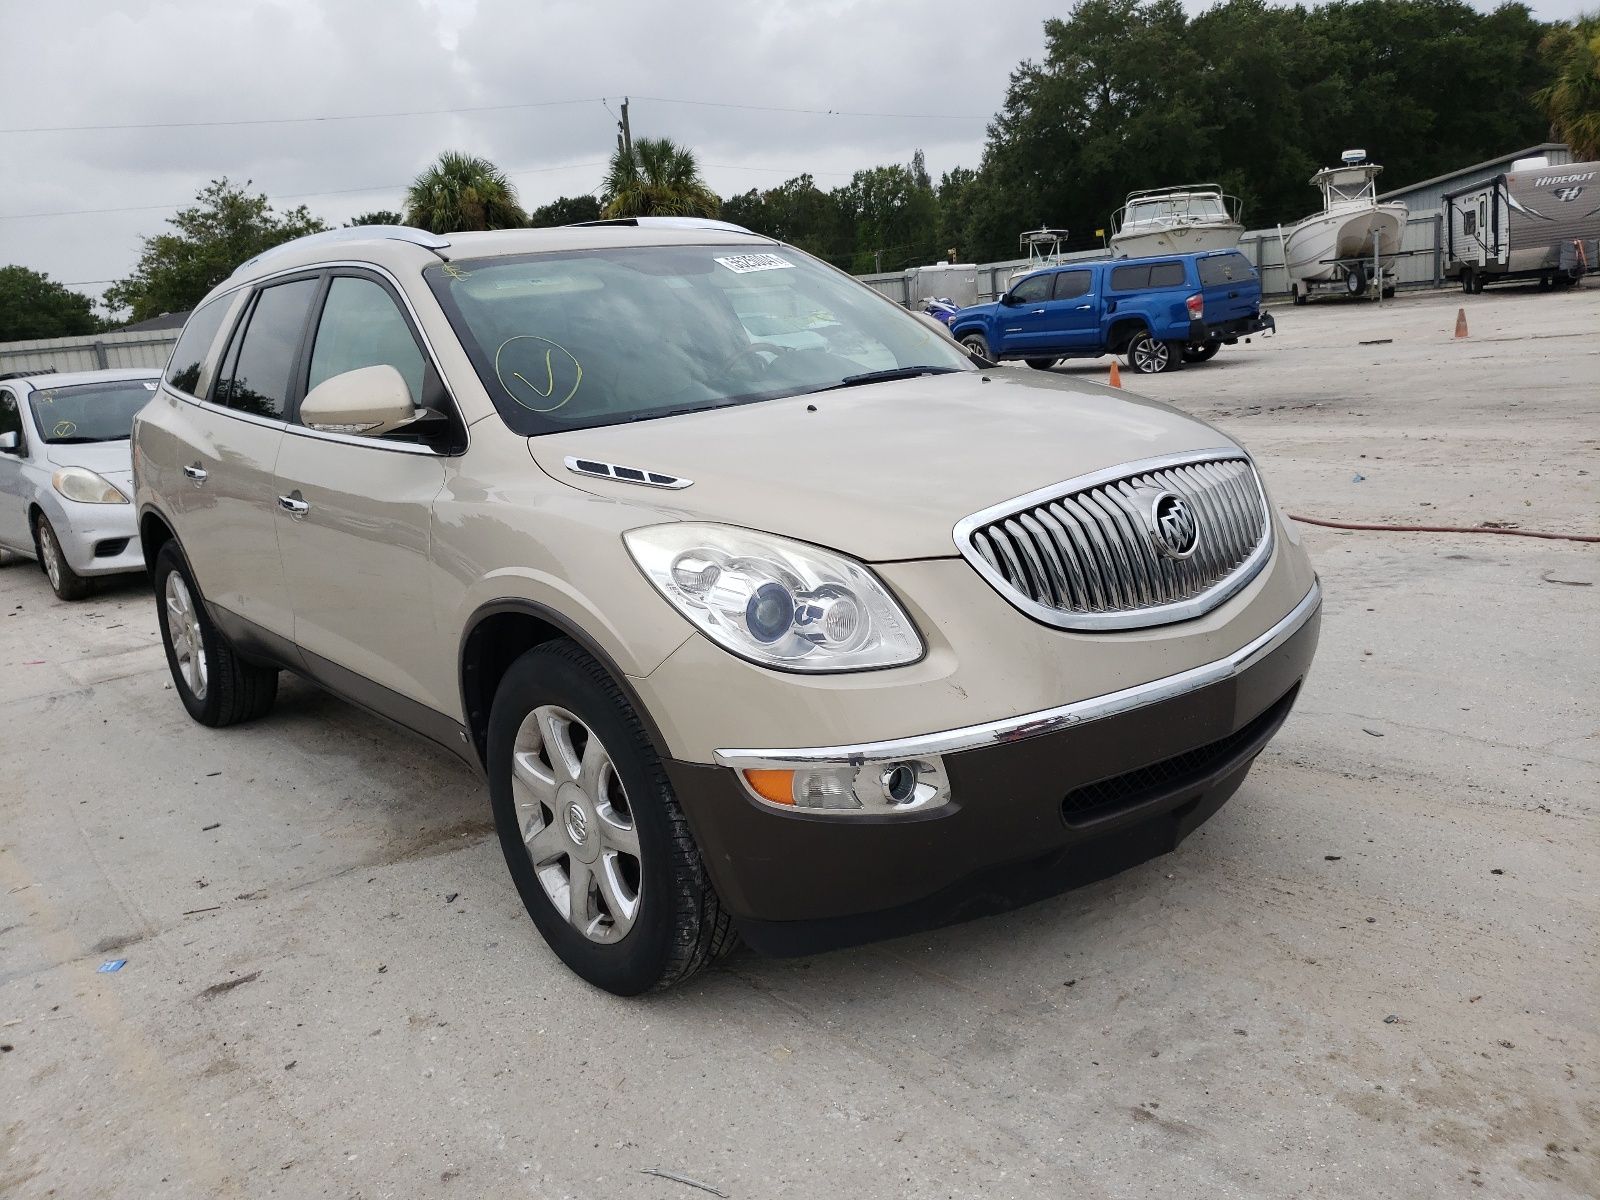 1 of 5GALRBED4AJ188643 Buick Enclave 2010